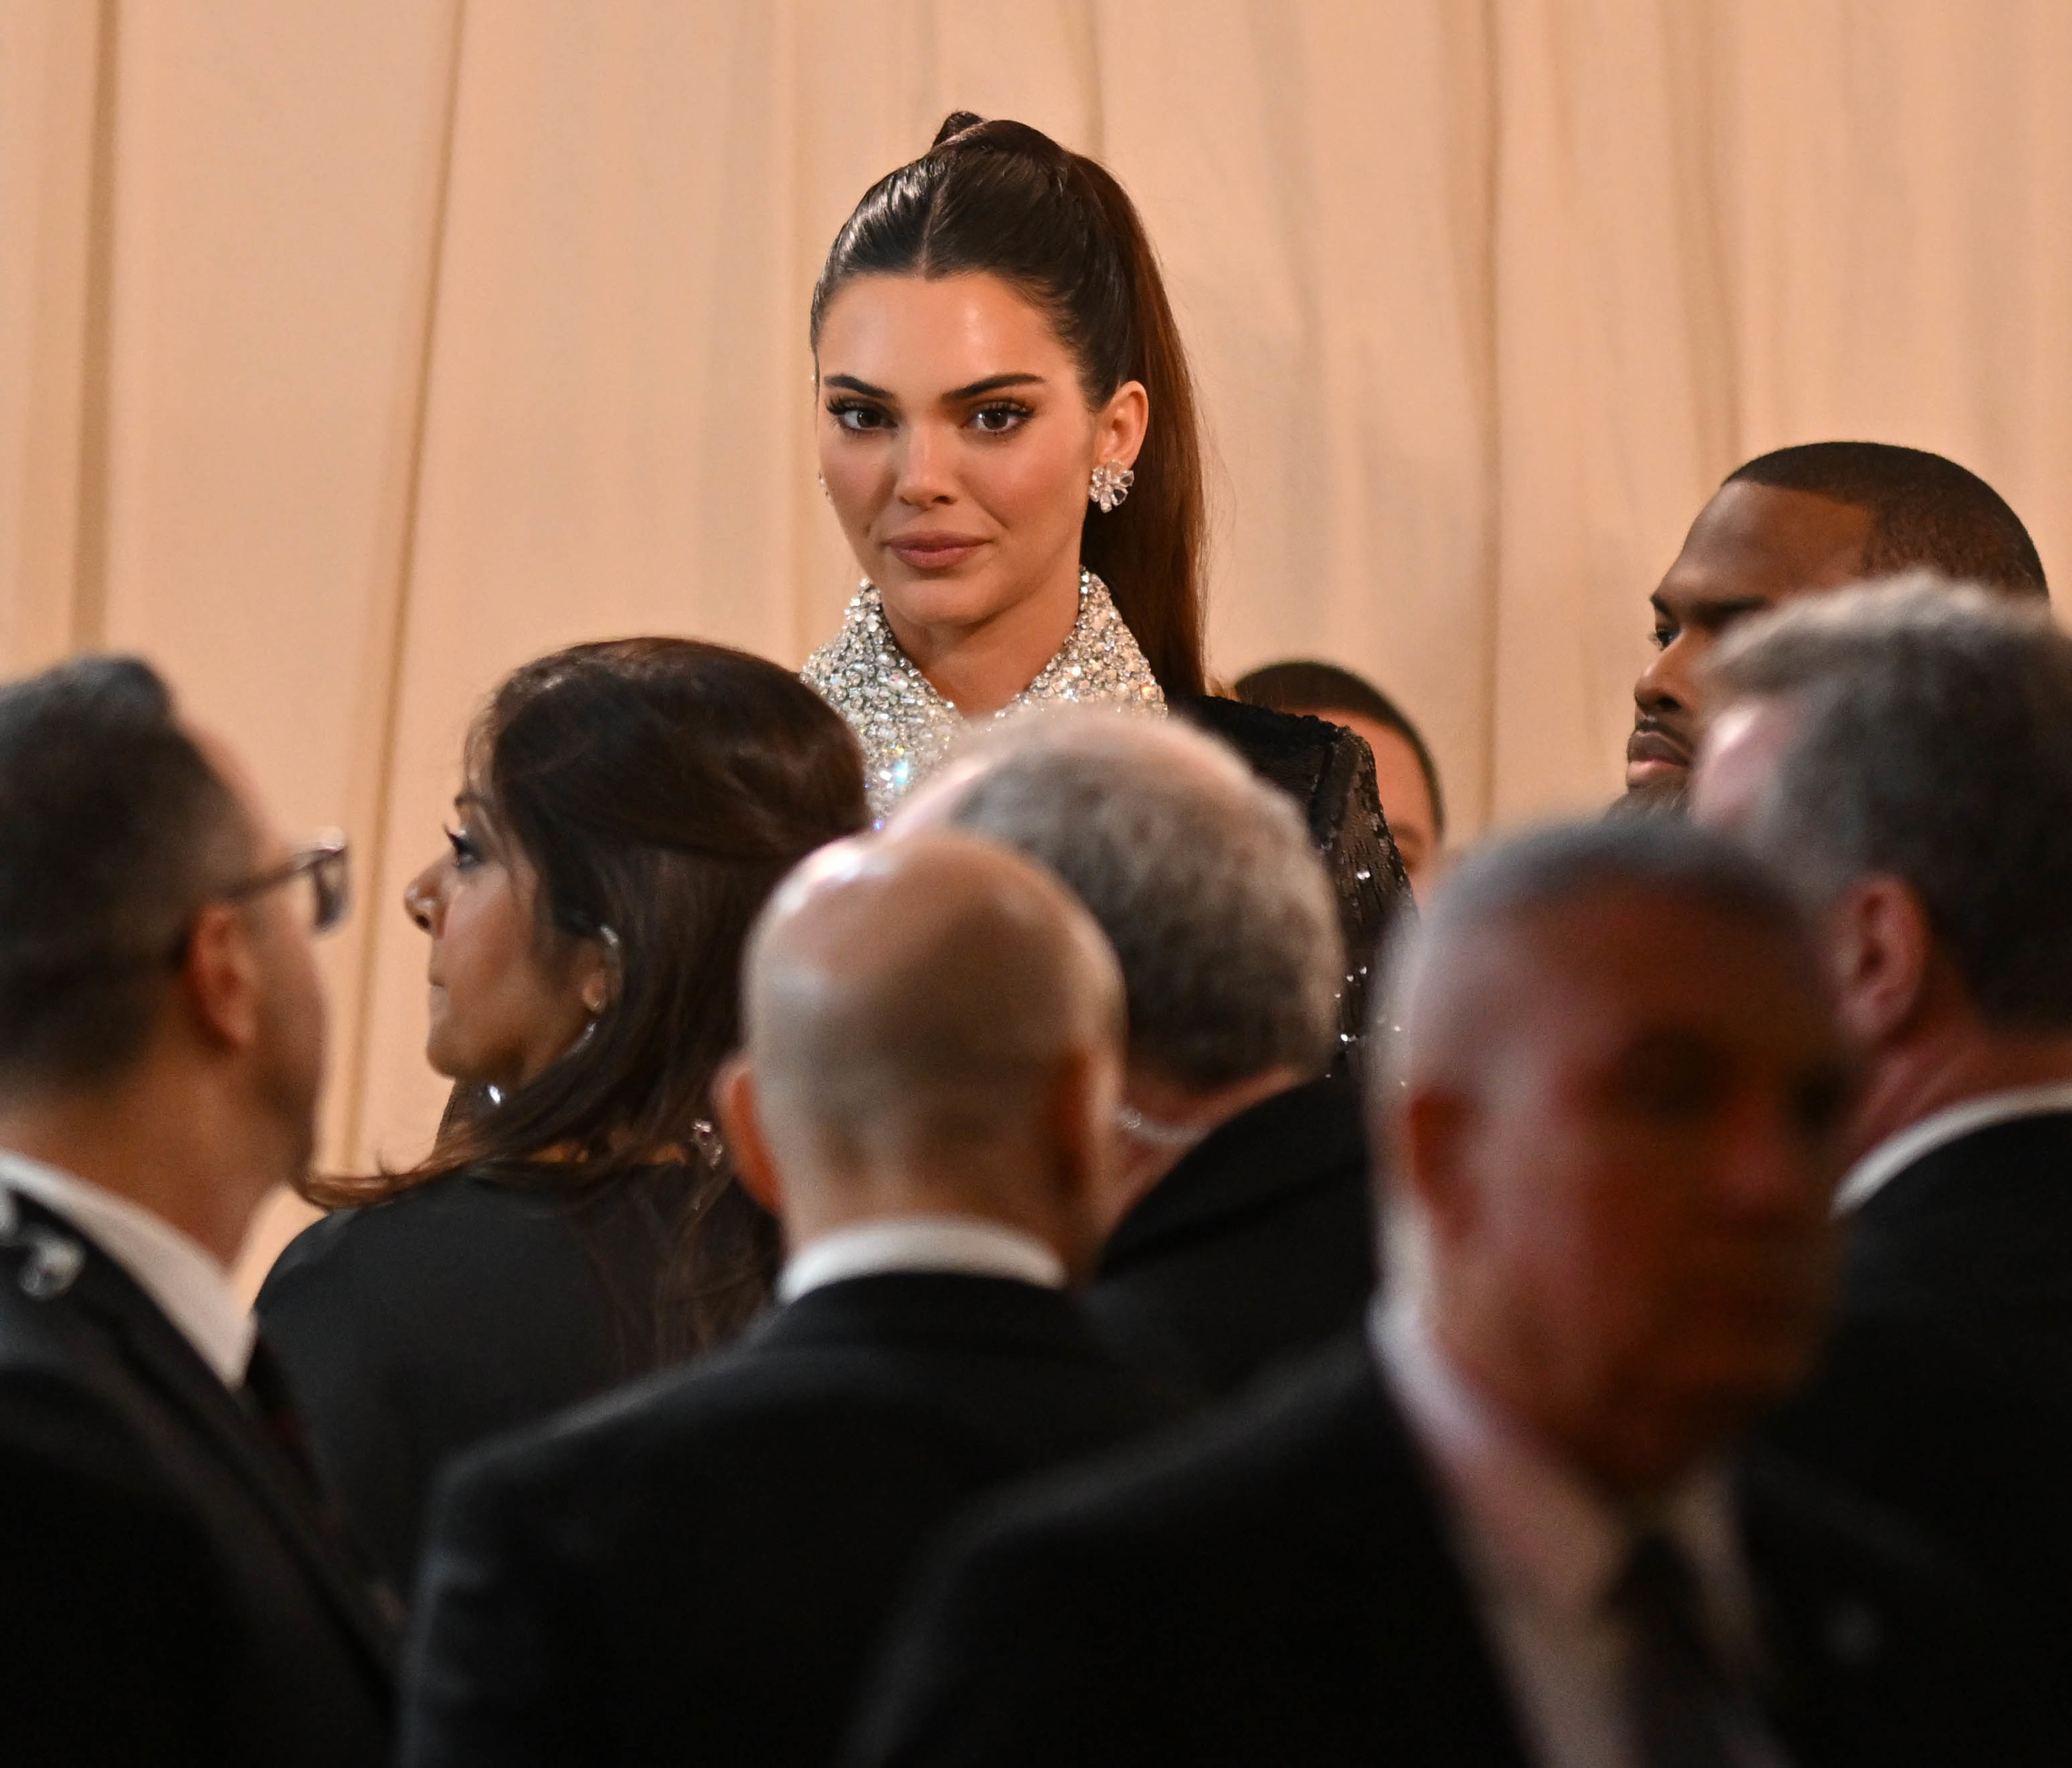 kendall towering over people at the met